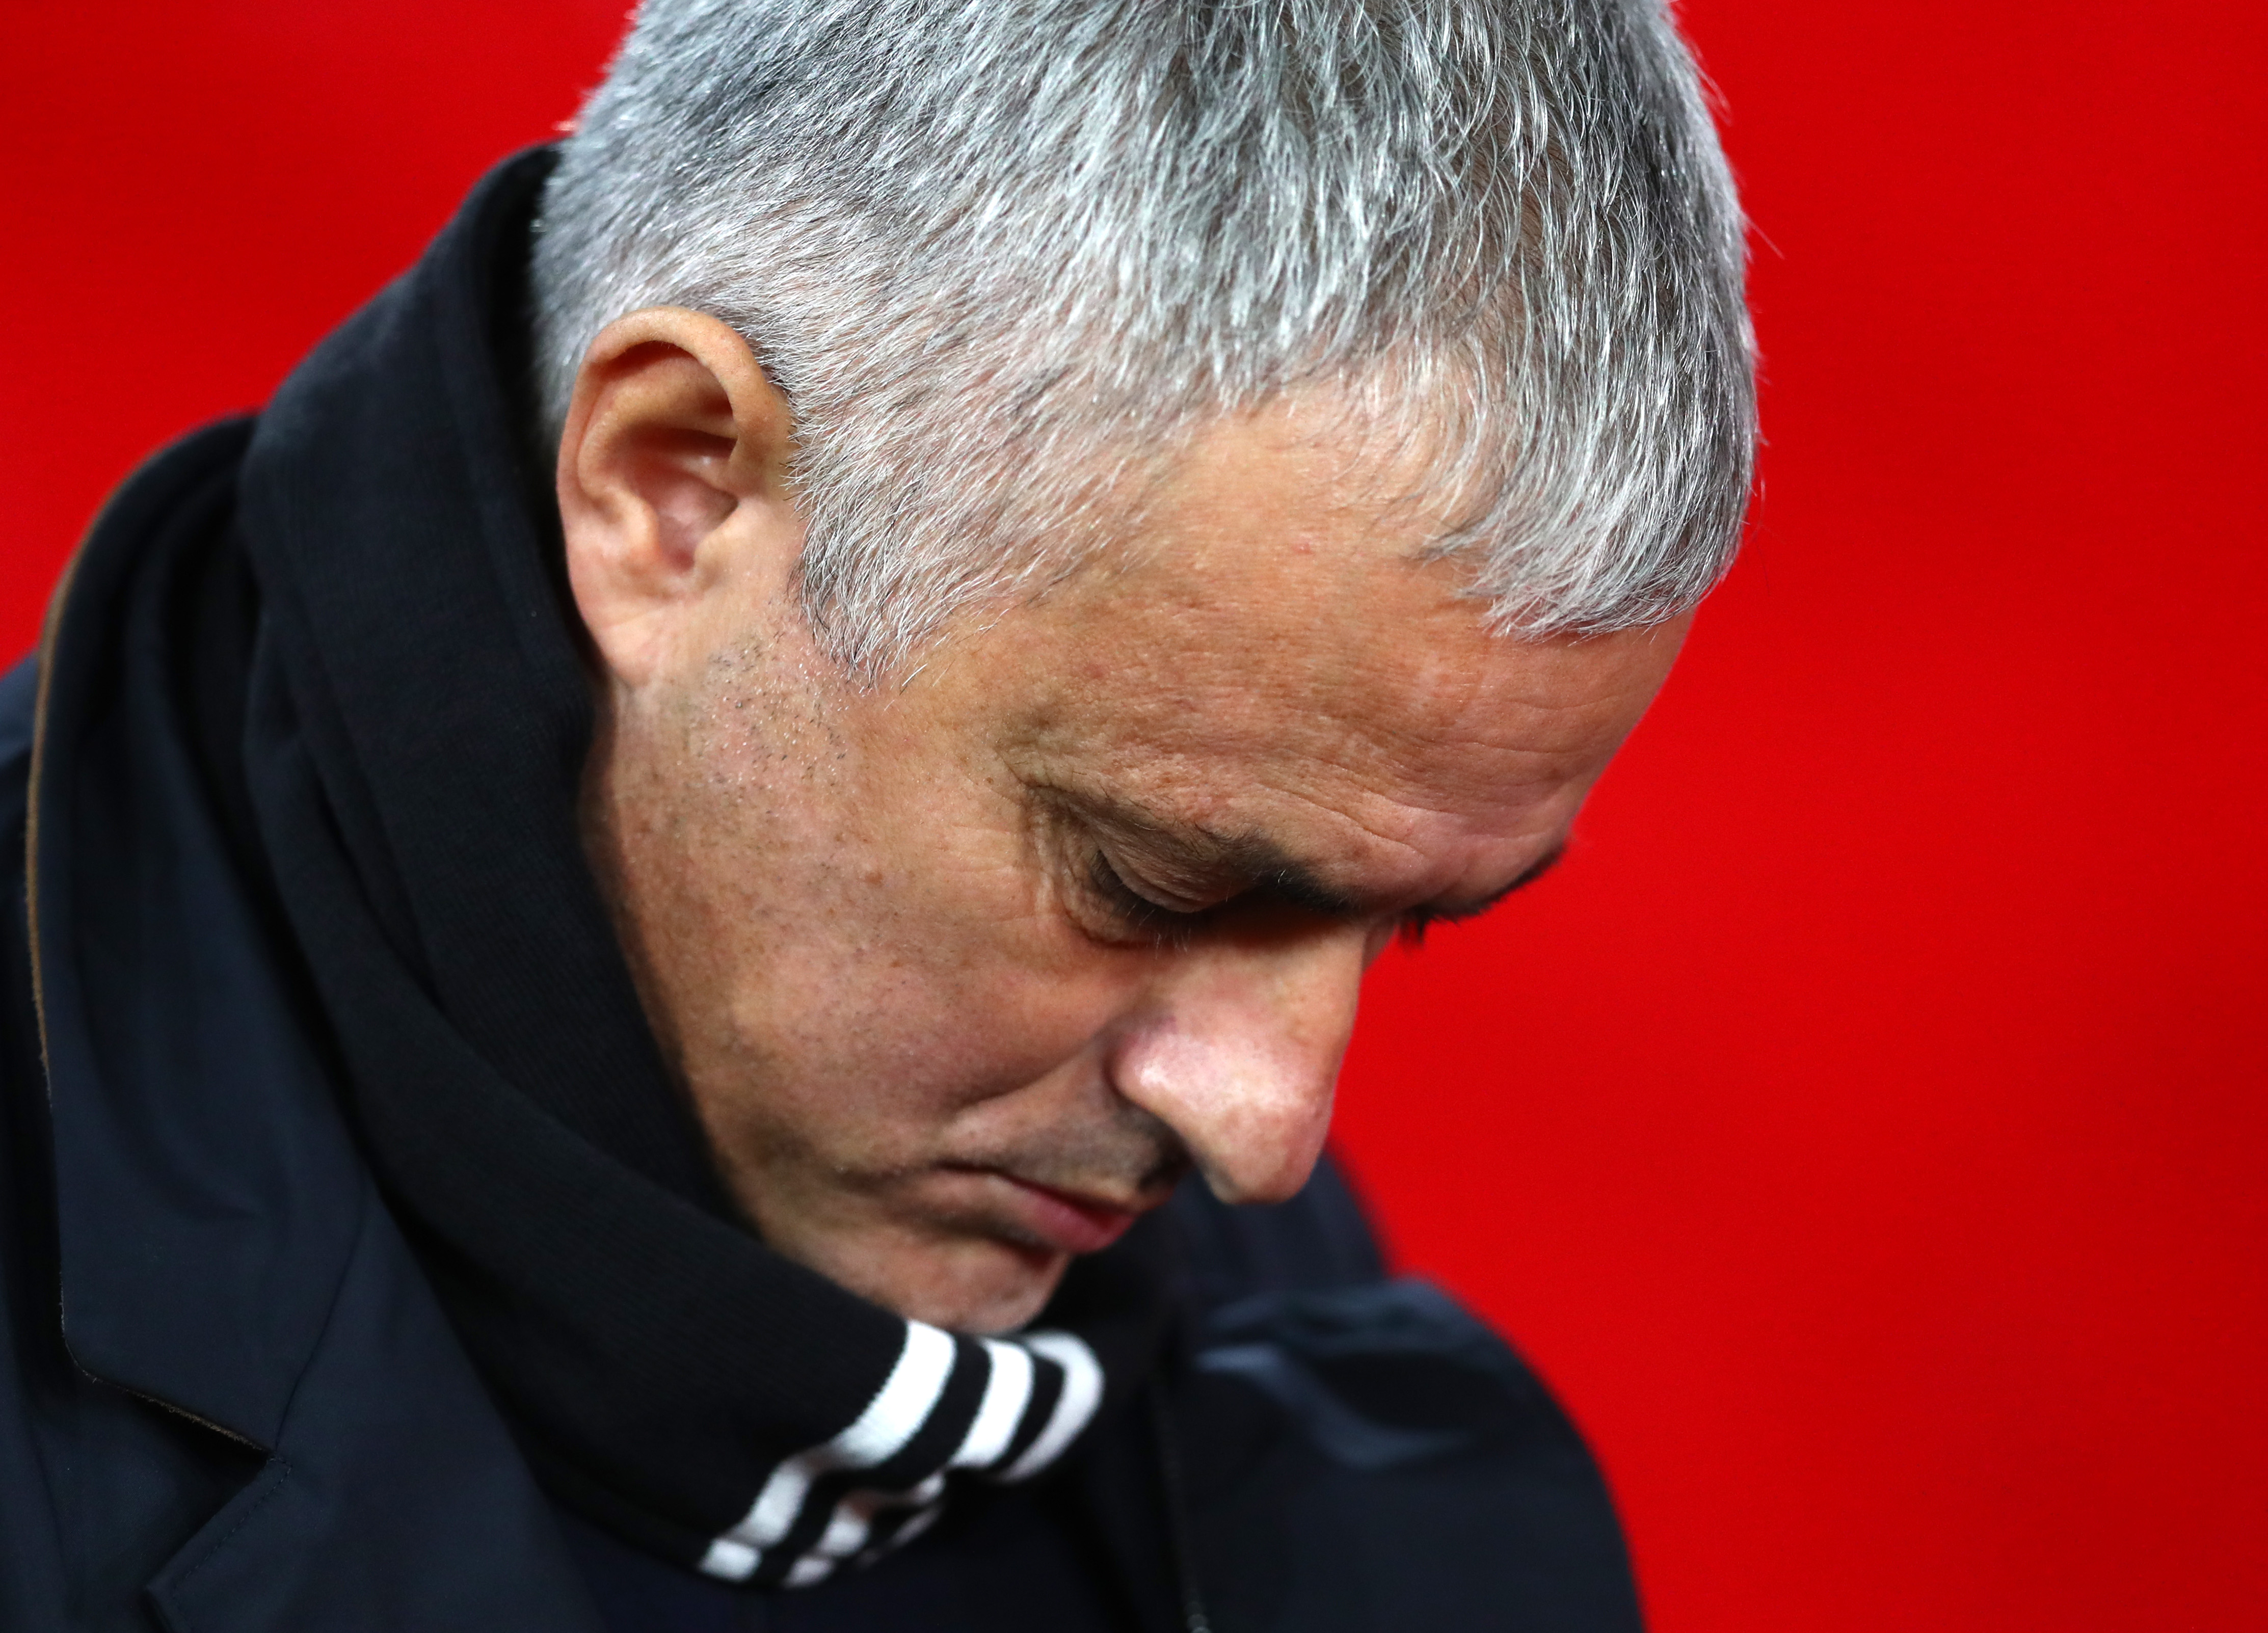 Mourinho bit the dust for his reluctance to adapt. (Photo by Dan Istitene/Getty Images)